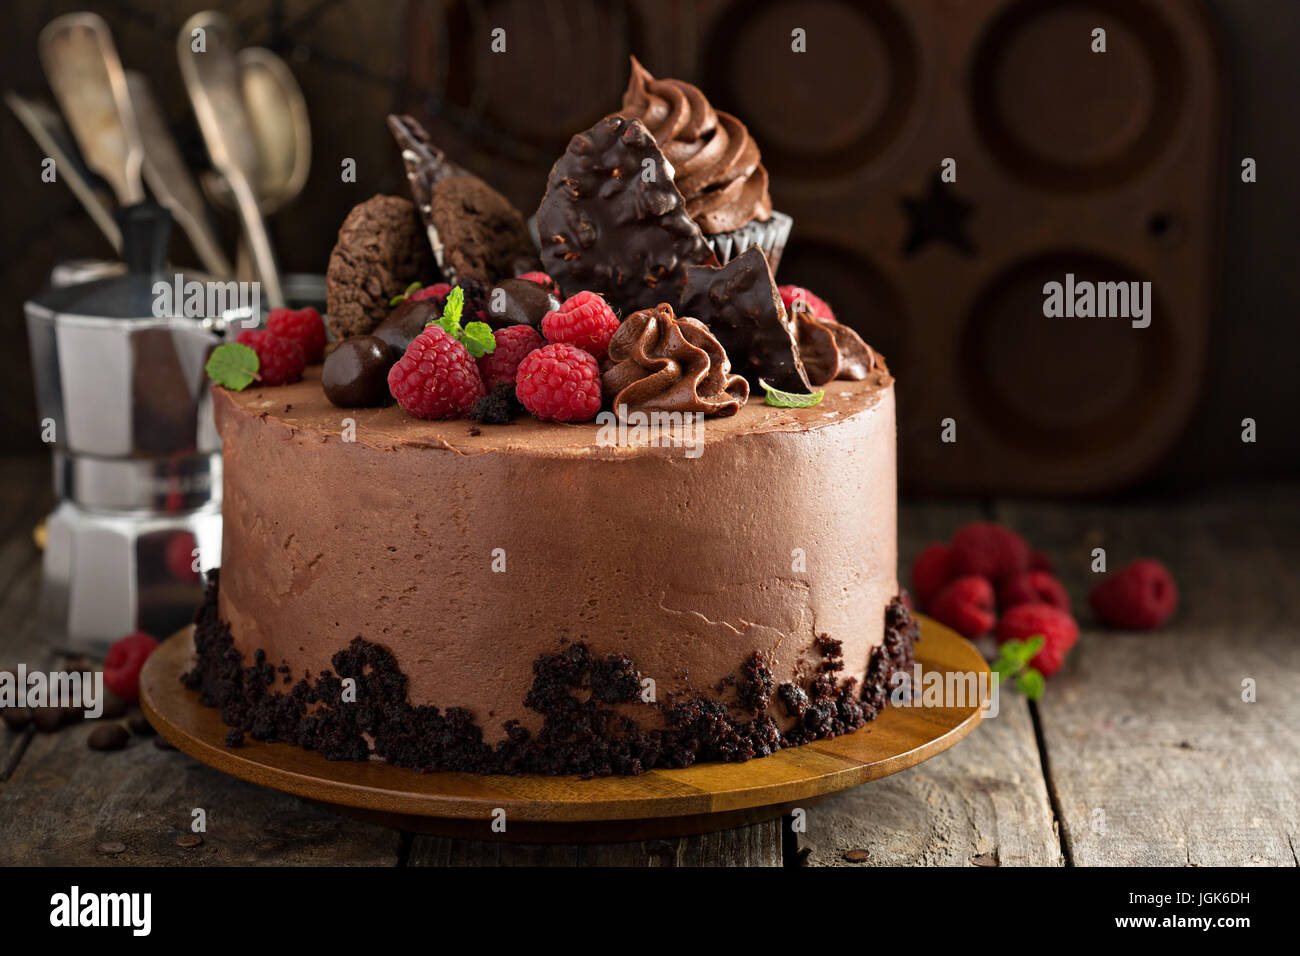 Gourmet chocolate cake with decorations Stock Photo